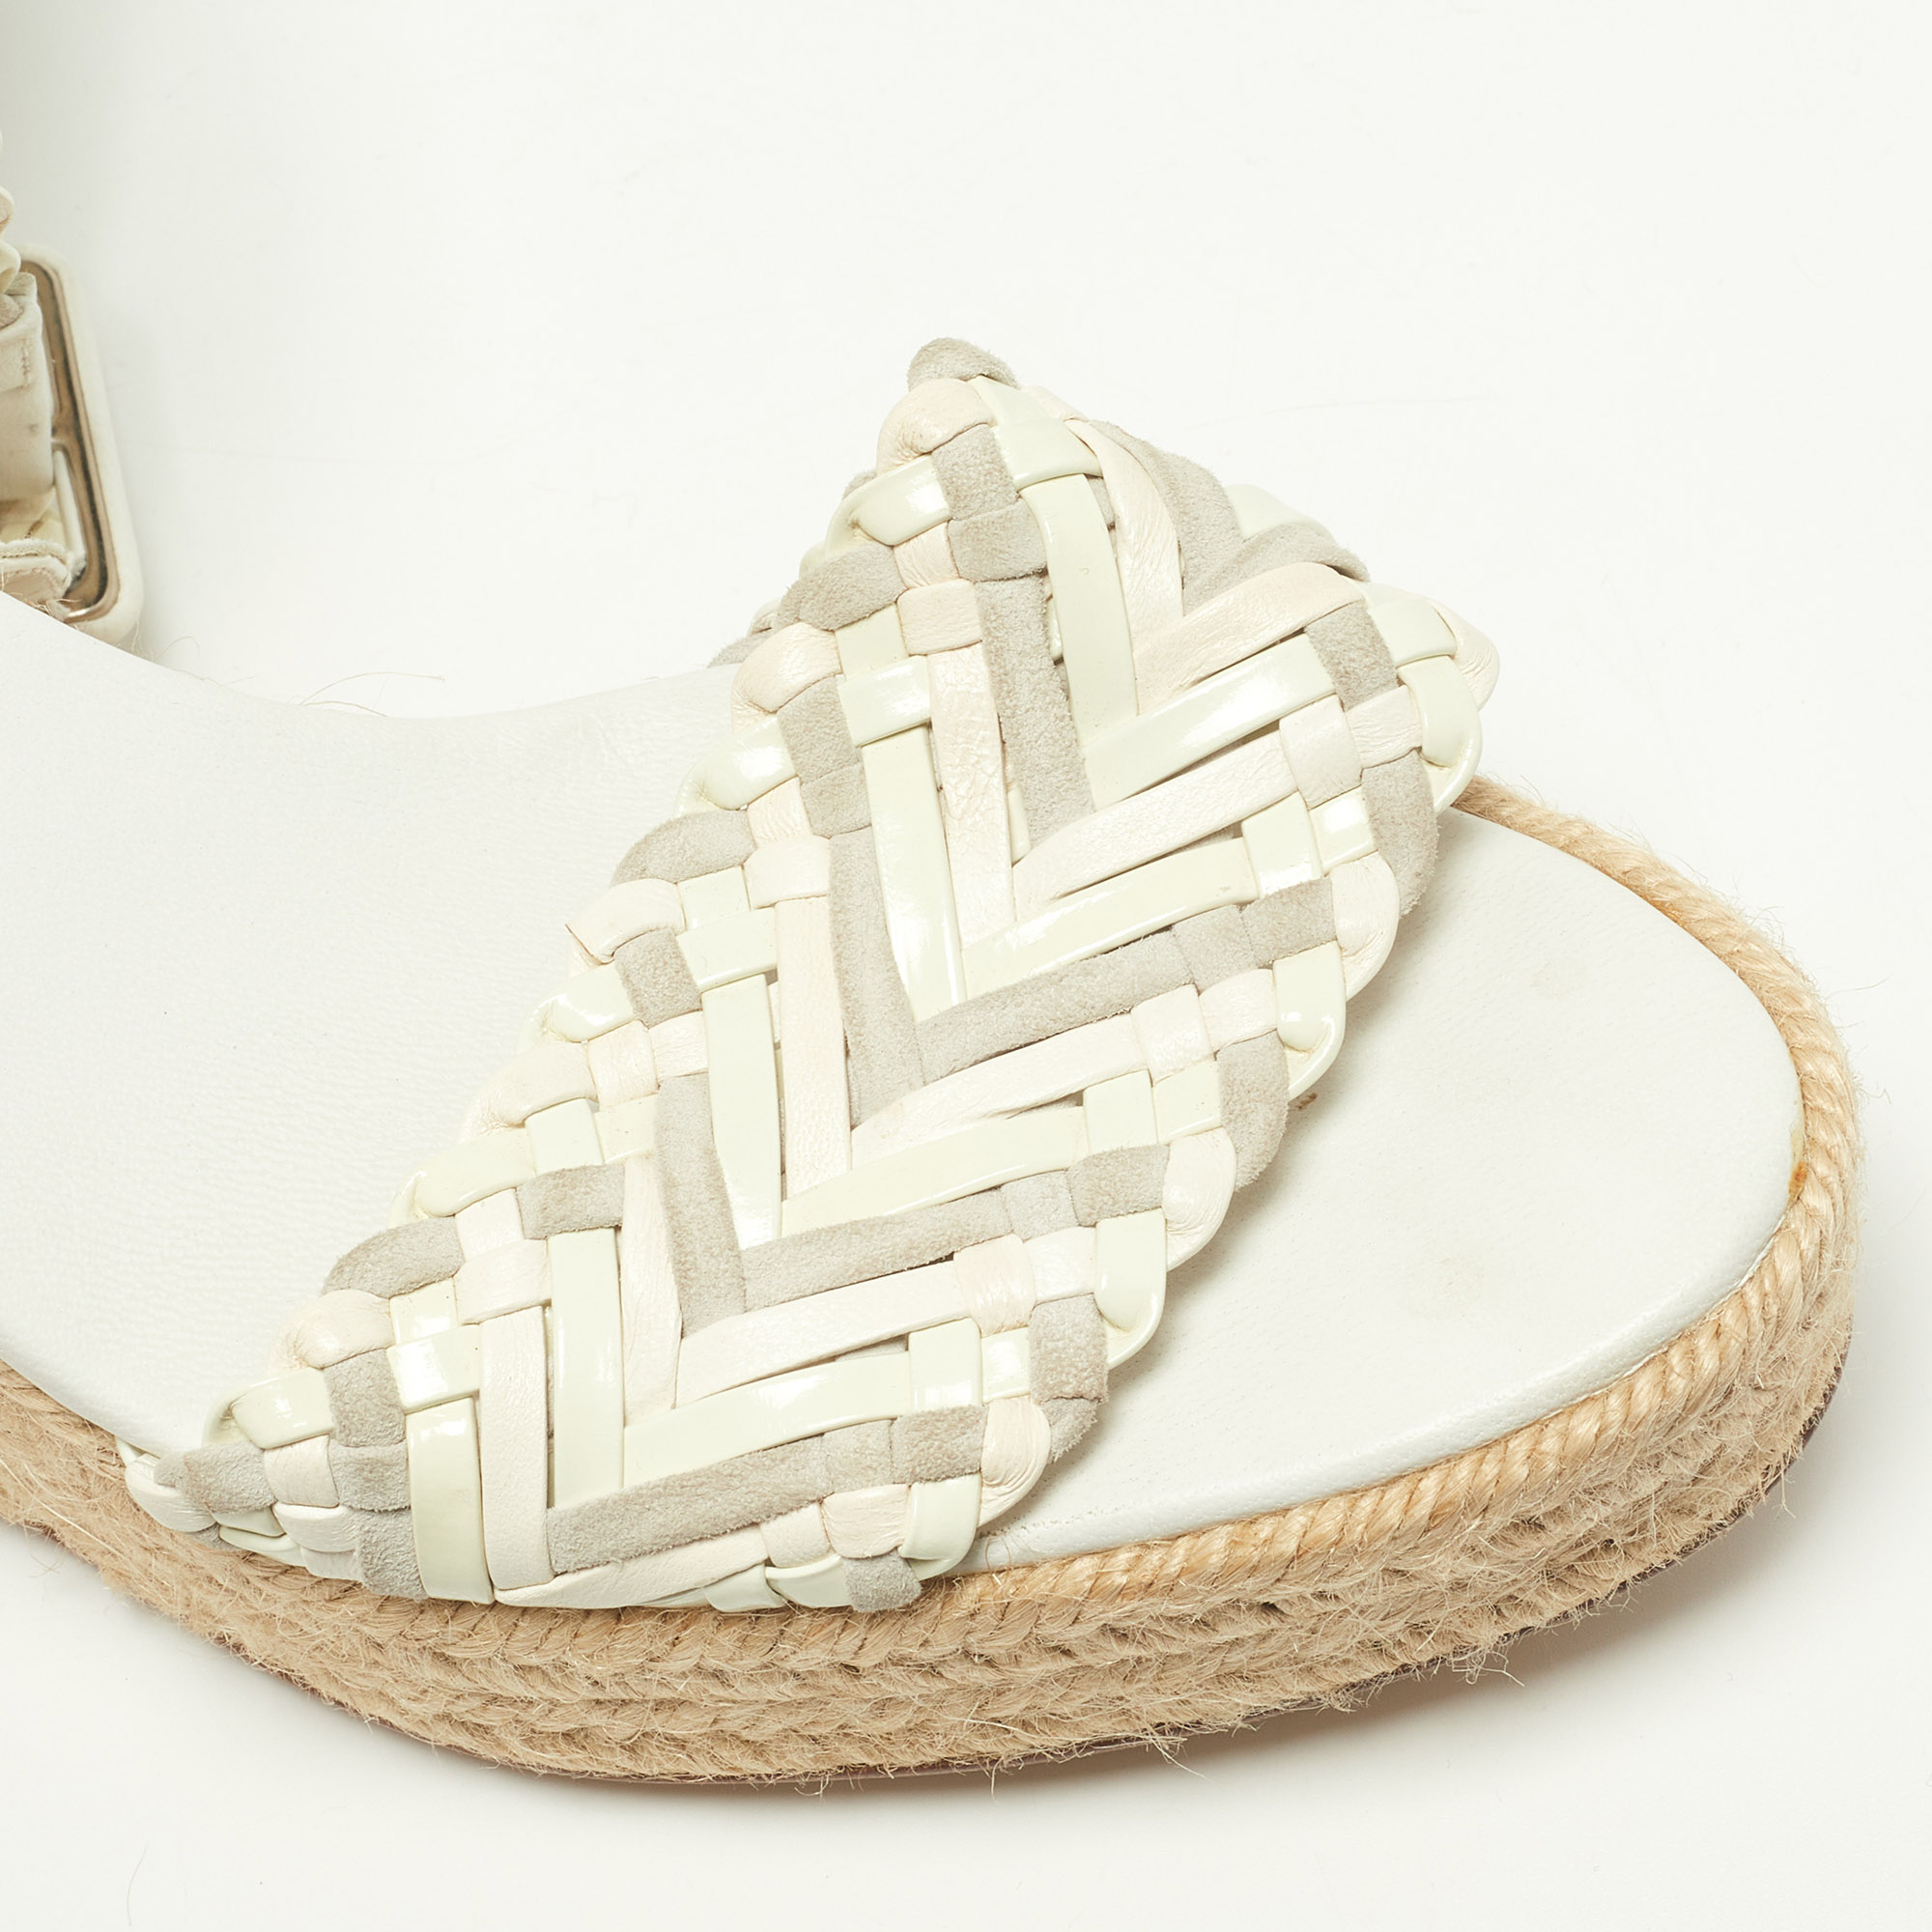 Hermes White/Grey Woven Patent Leather And Suede Sofia Espadrille Wedge Sandals Size 39